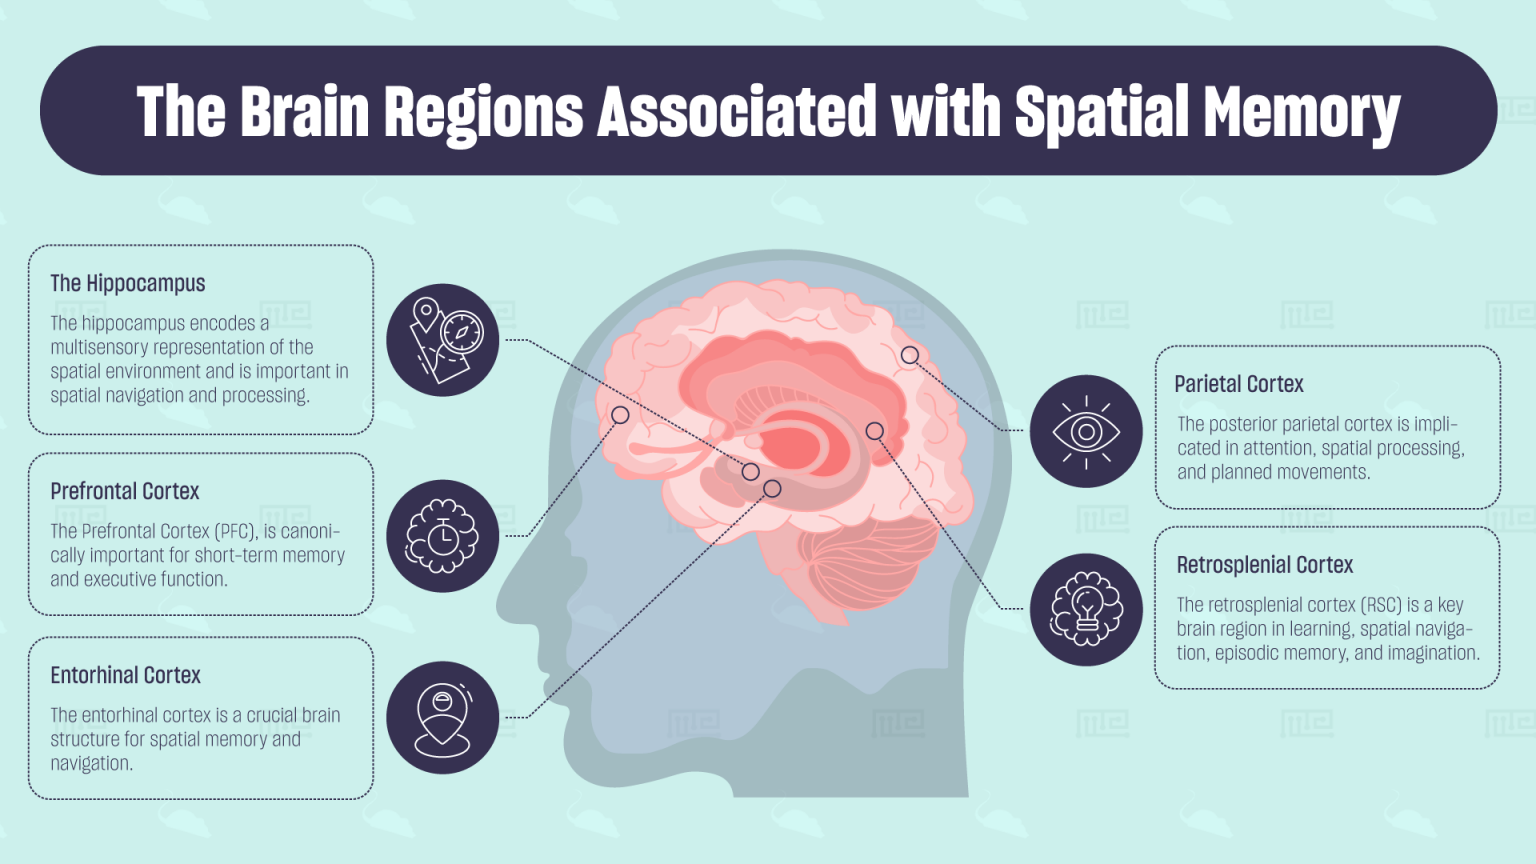 The Brain Regions Associated with Spatial Memory